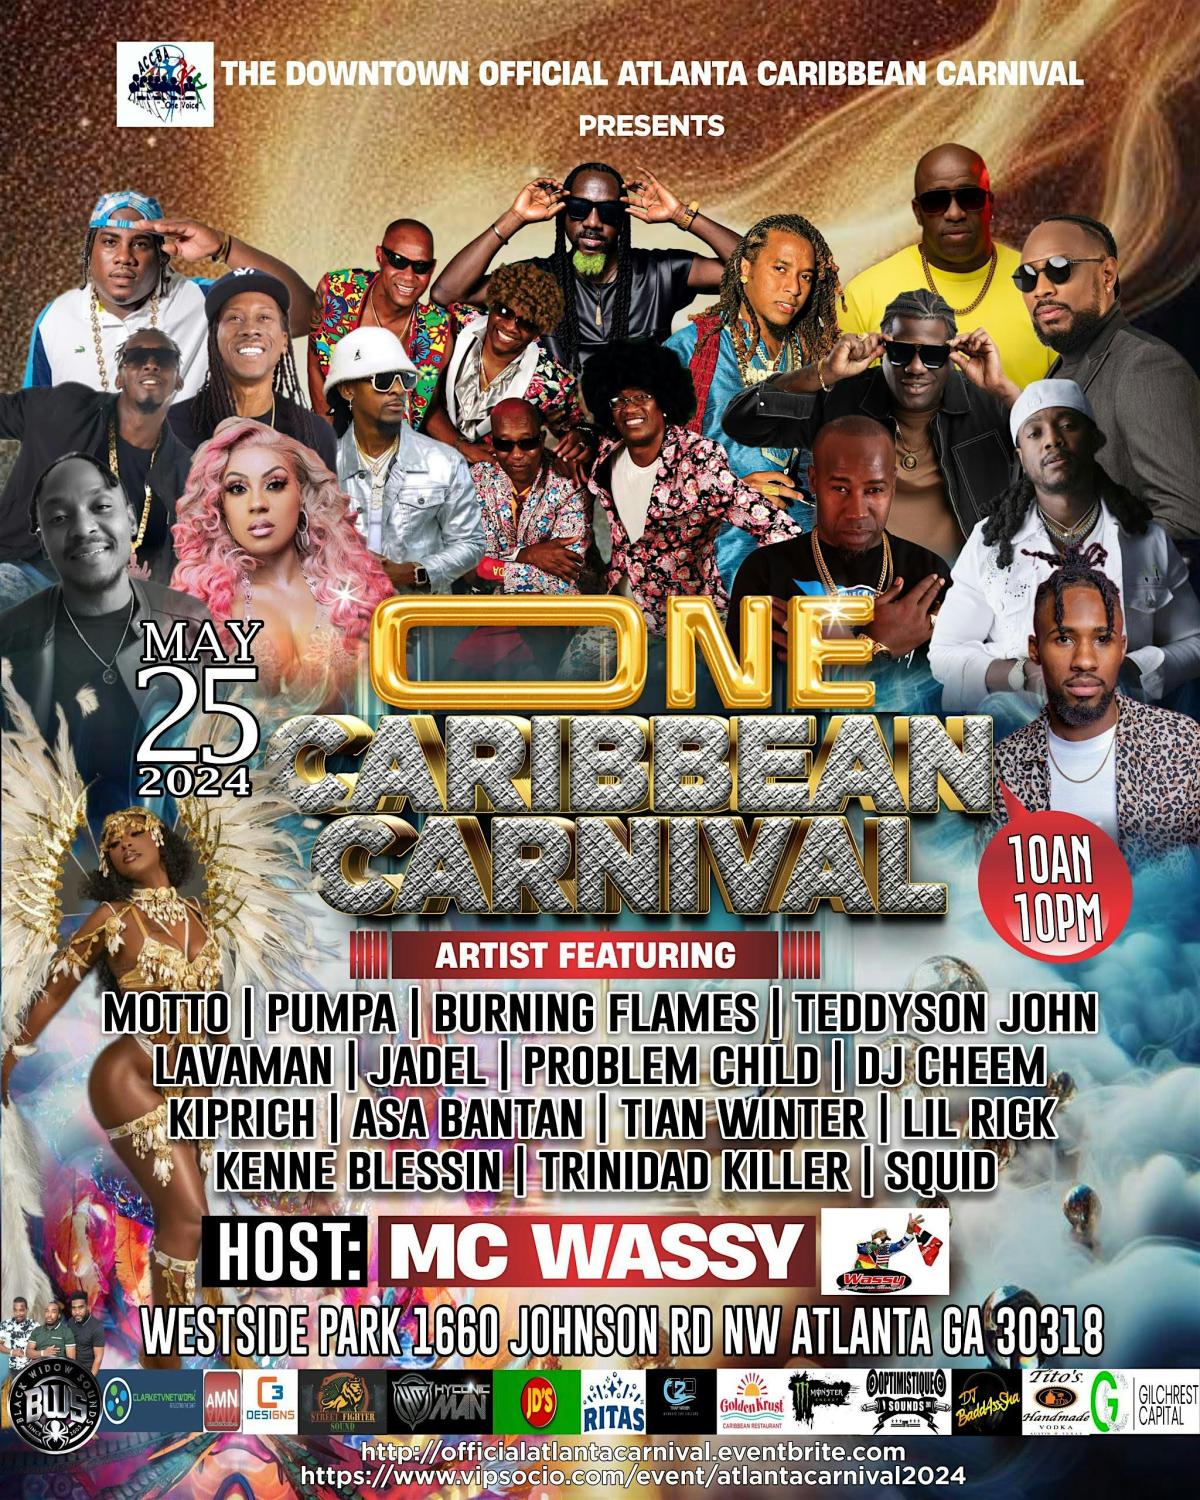 One Caribbean Carnival flyer or graphic.